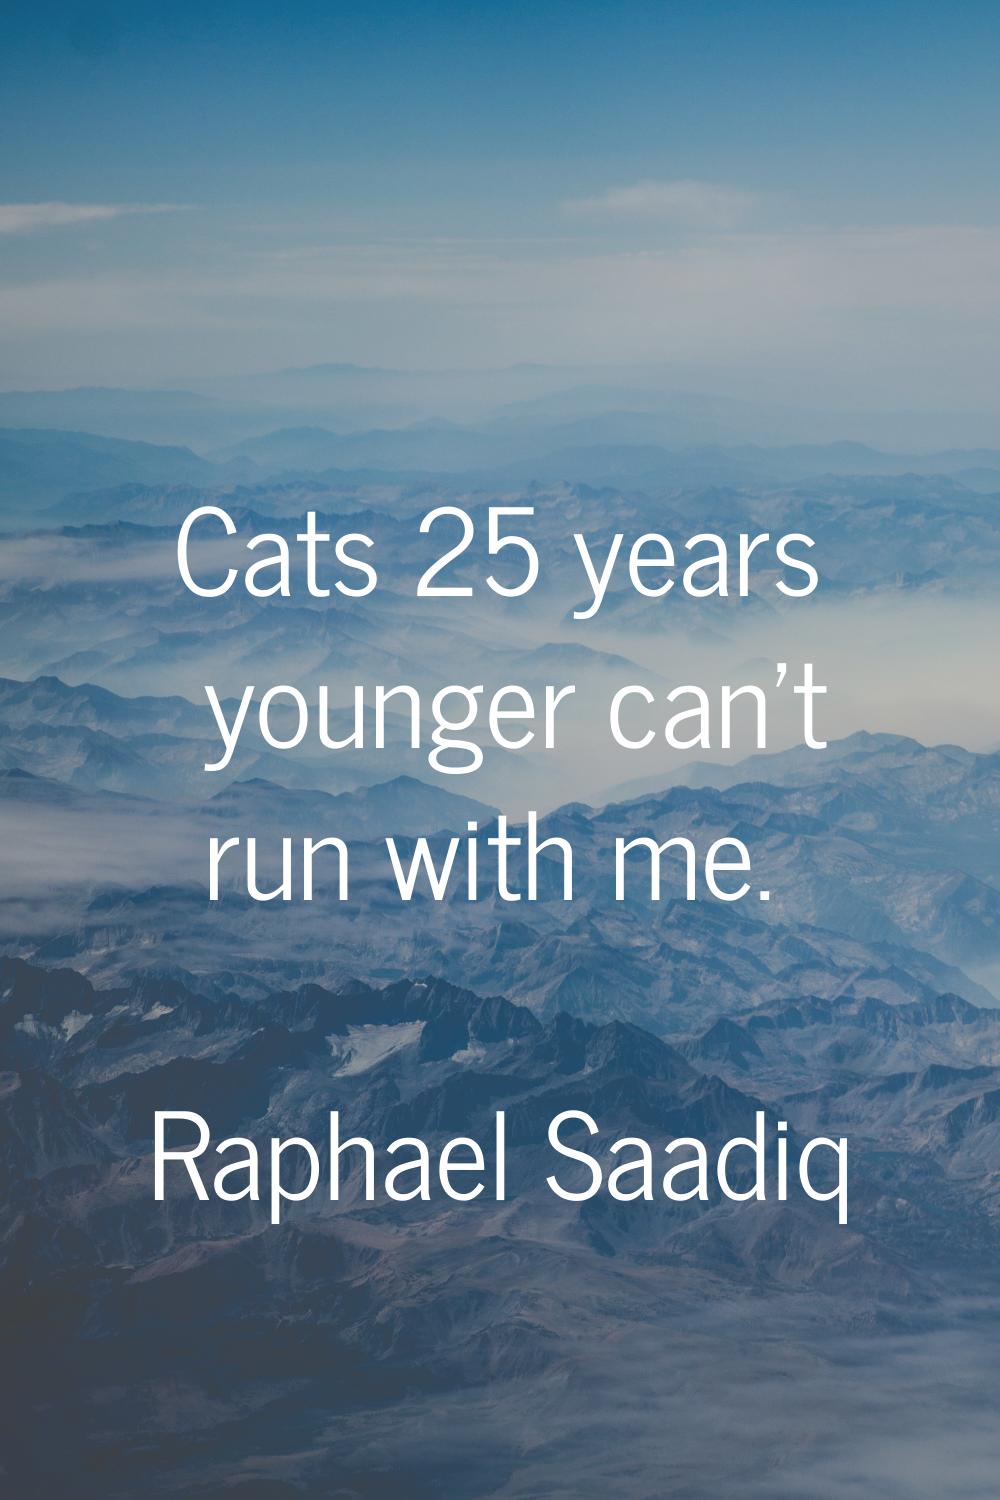 Cats 25 years younger can't run with me.